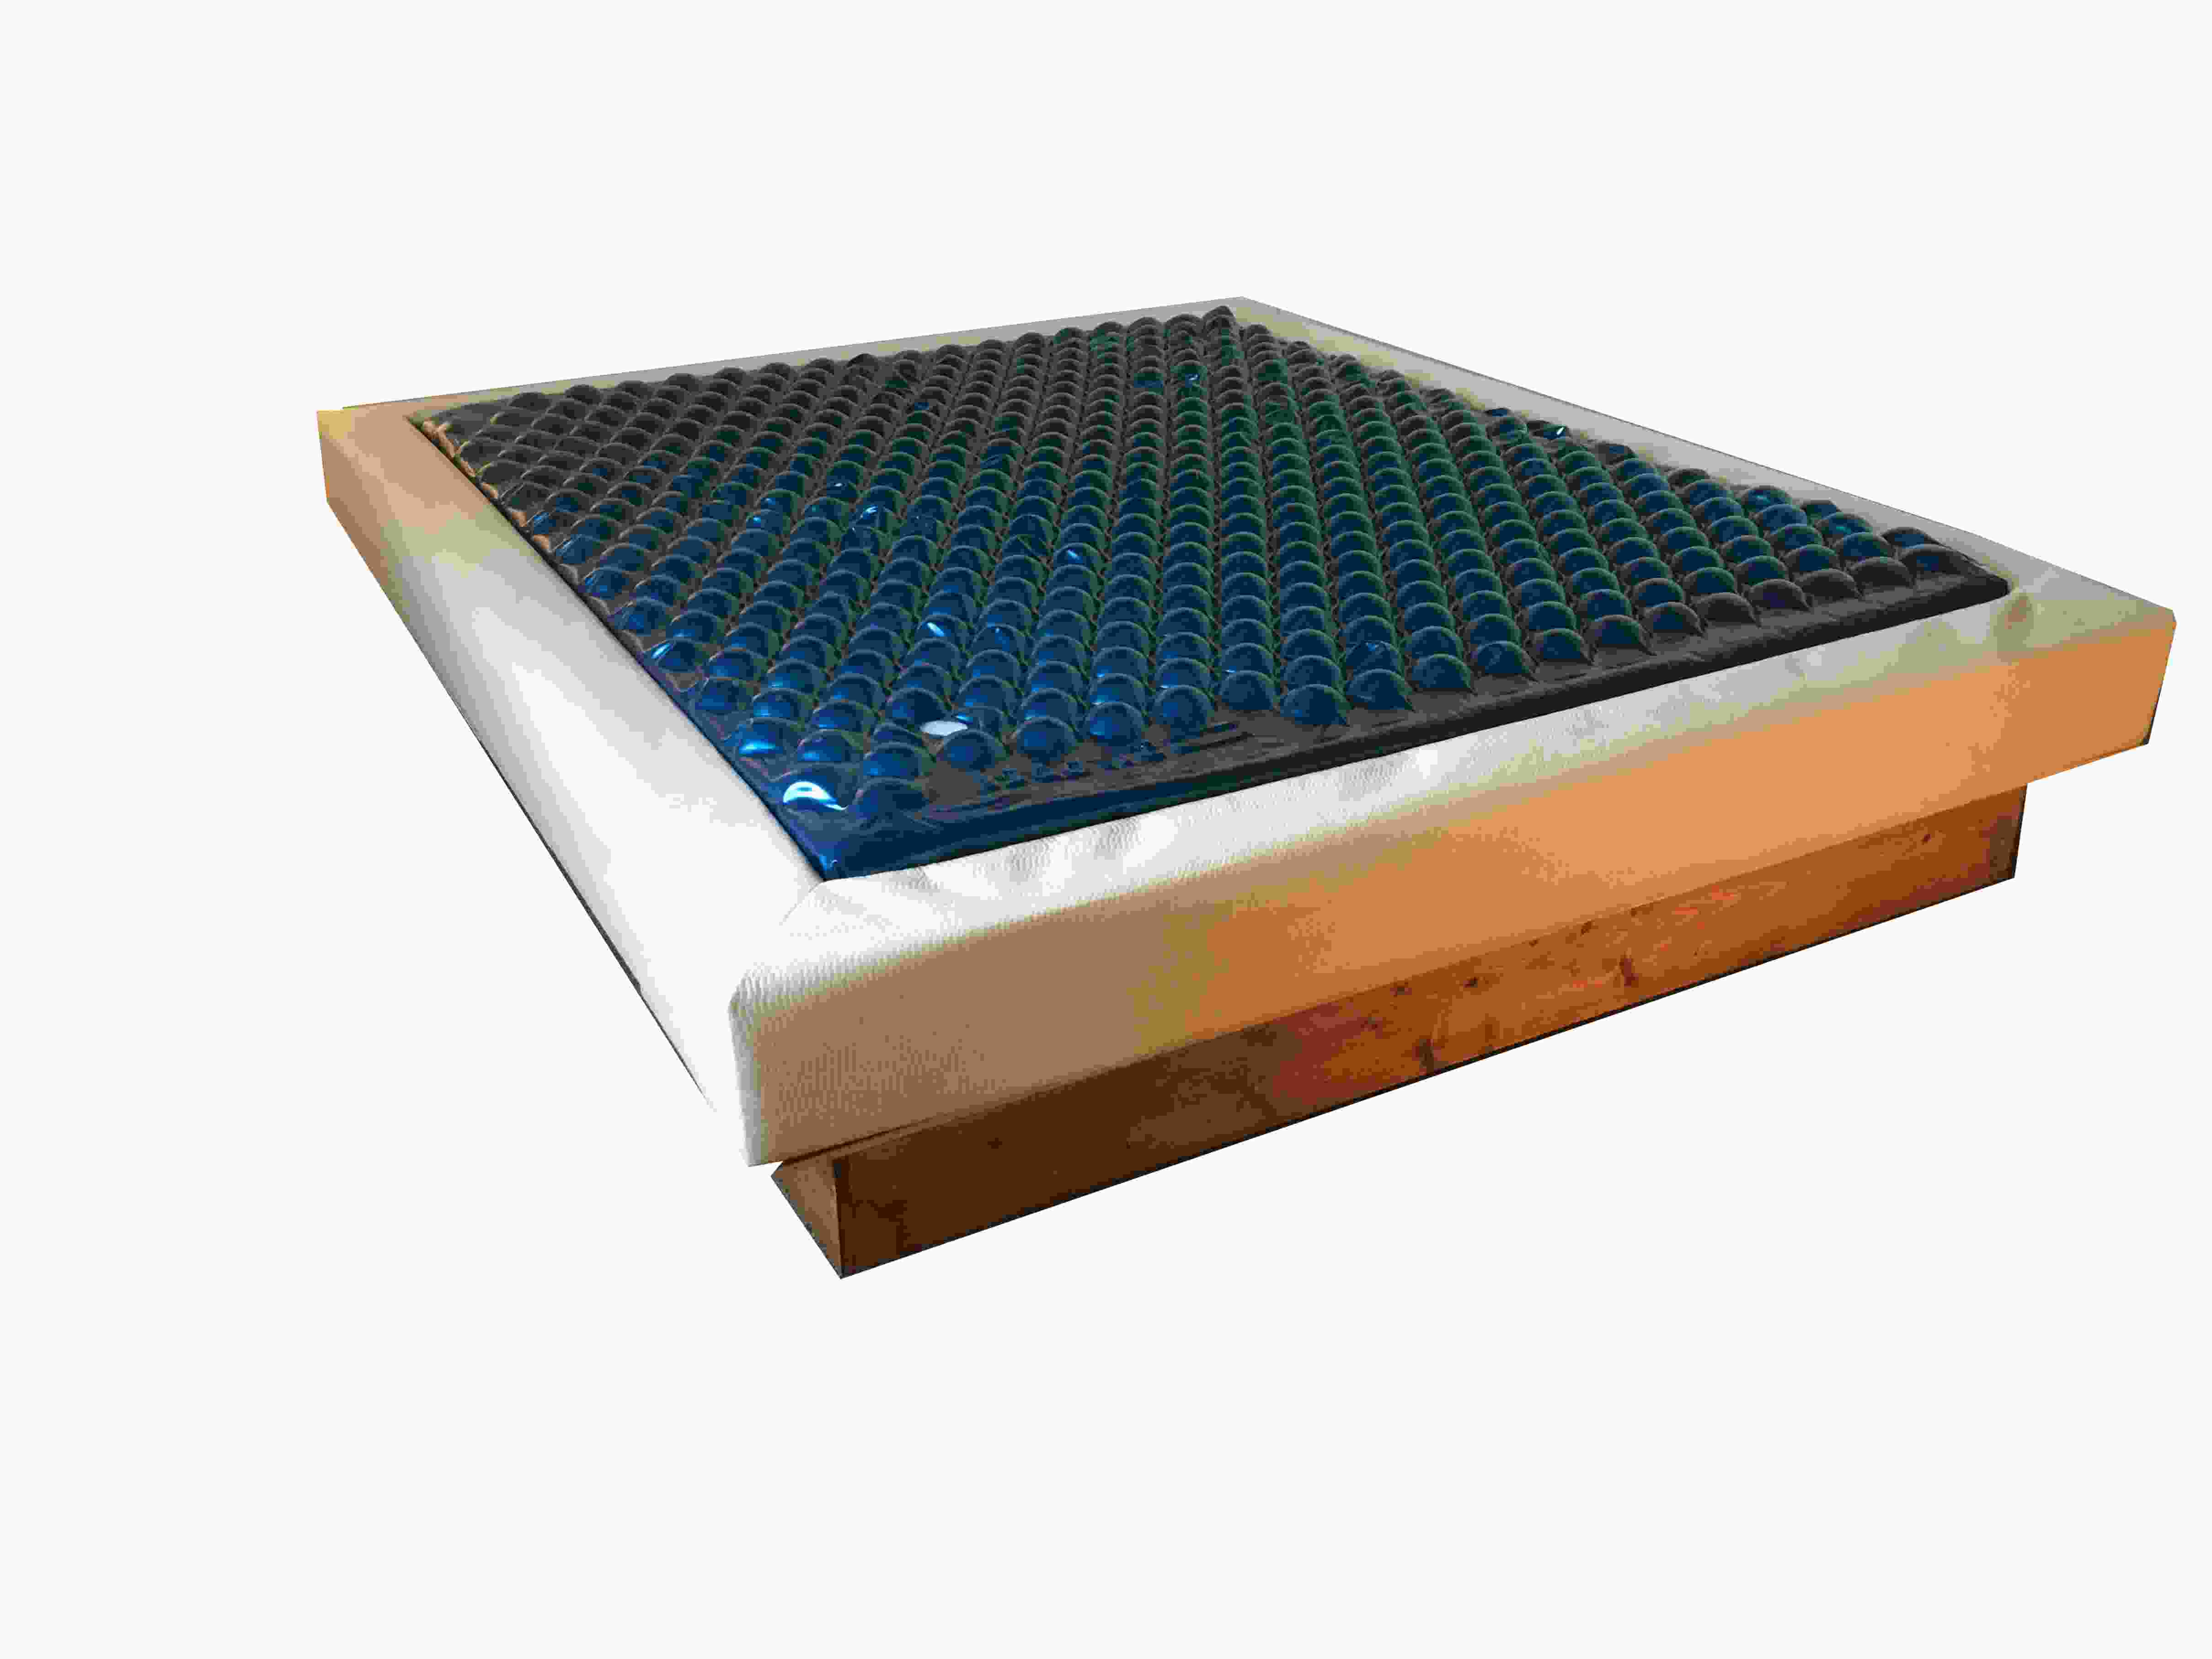 used waterbed mattress for sale